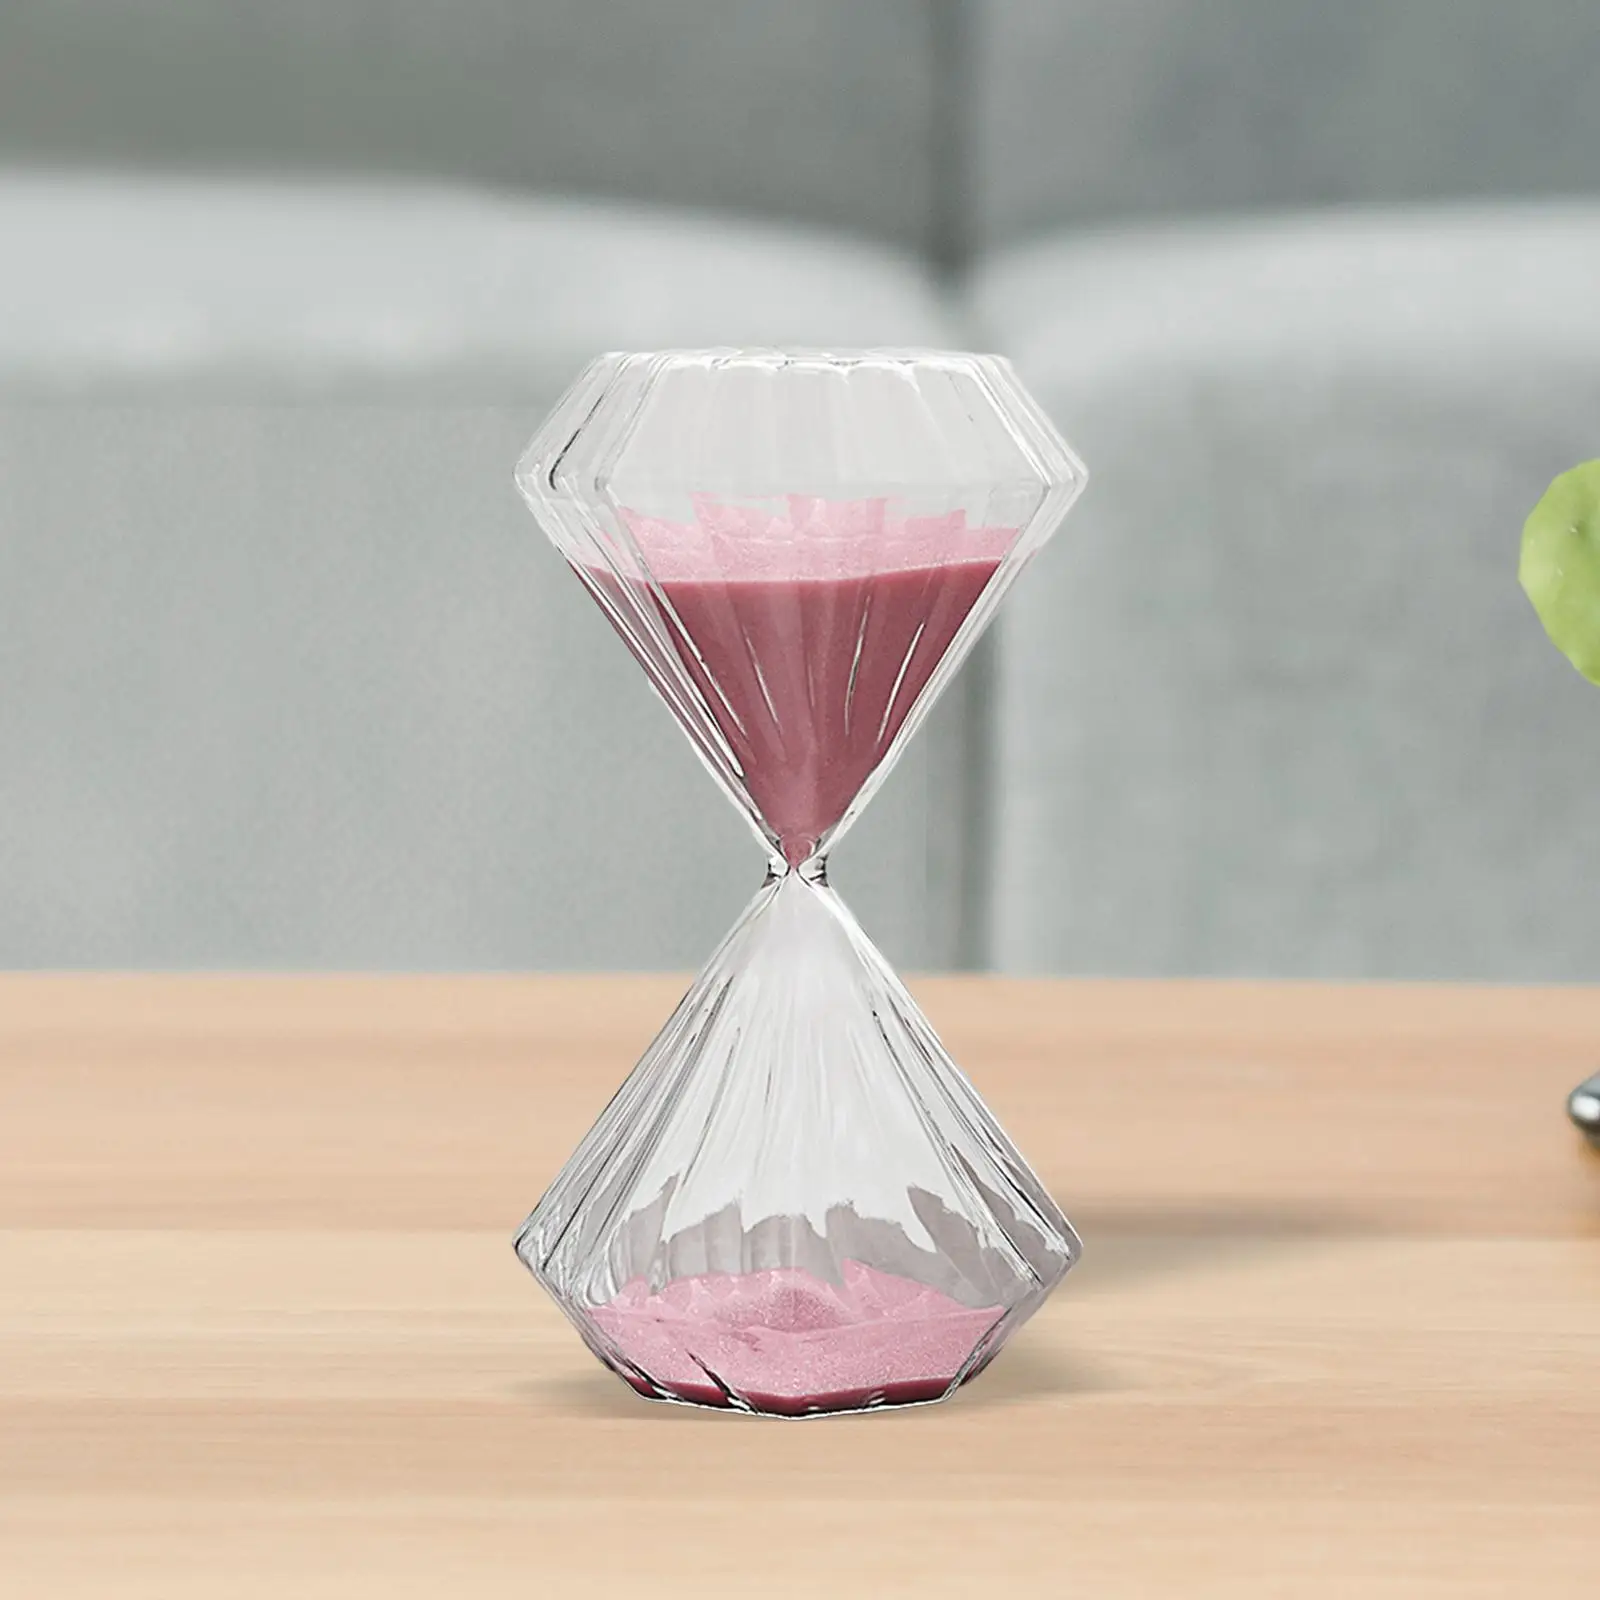 Sand Glass Timer Hourglass 30 Minutes Pink Sand Kitchen Accessories Sand Timer Workout Timer Tabletop Decoration for Living Room